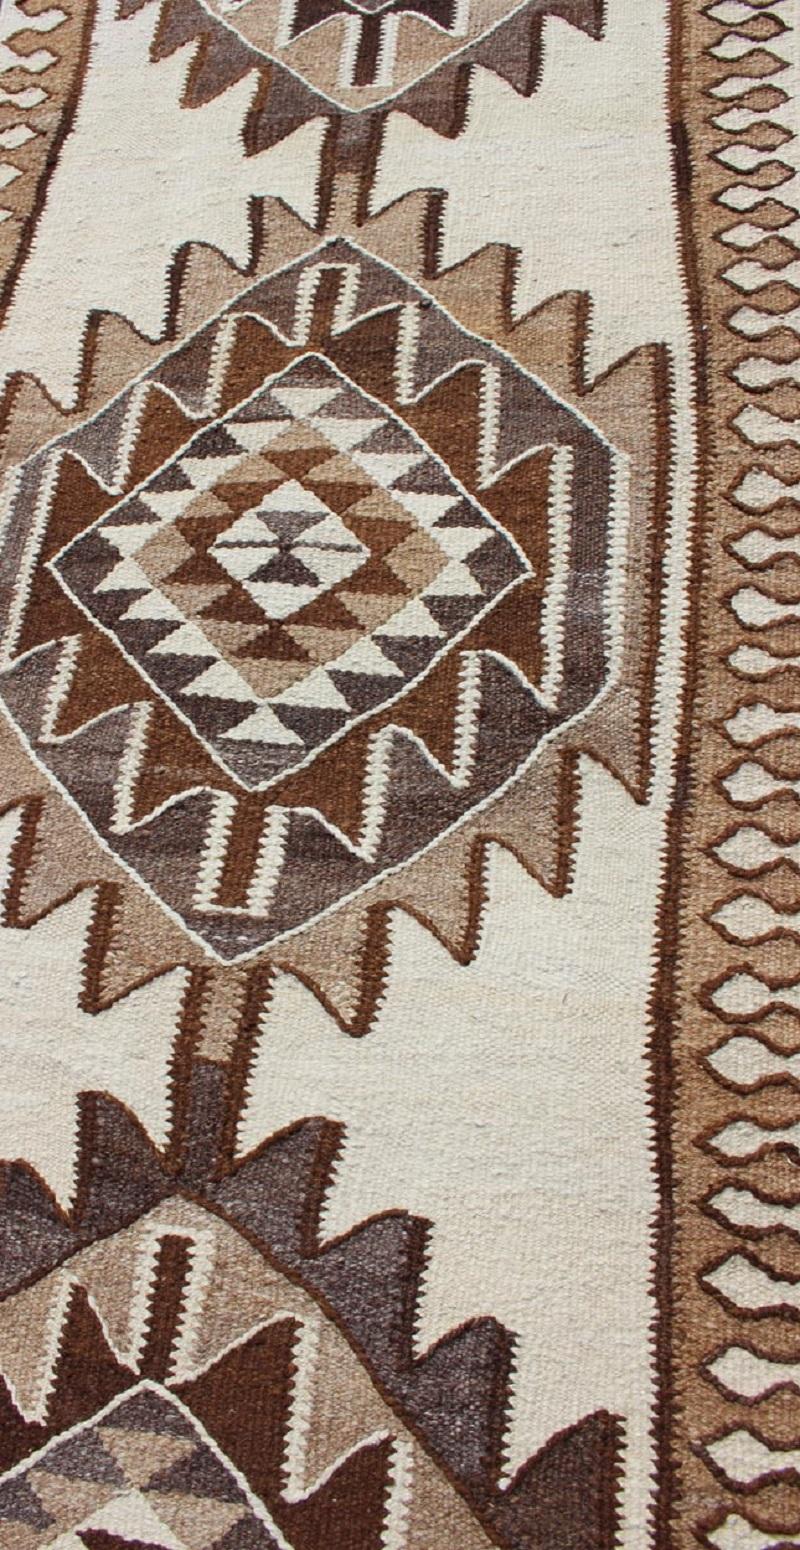 Vintage Turkish Kilim Runner with Tribal Medallions in Shades of Brown and Cream For Sale 4